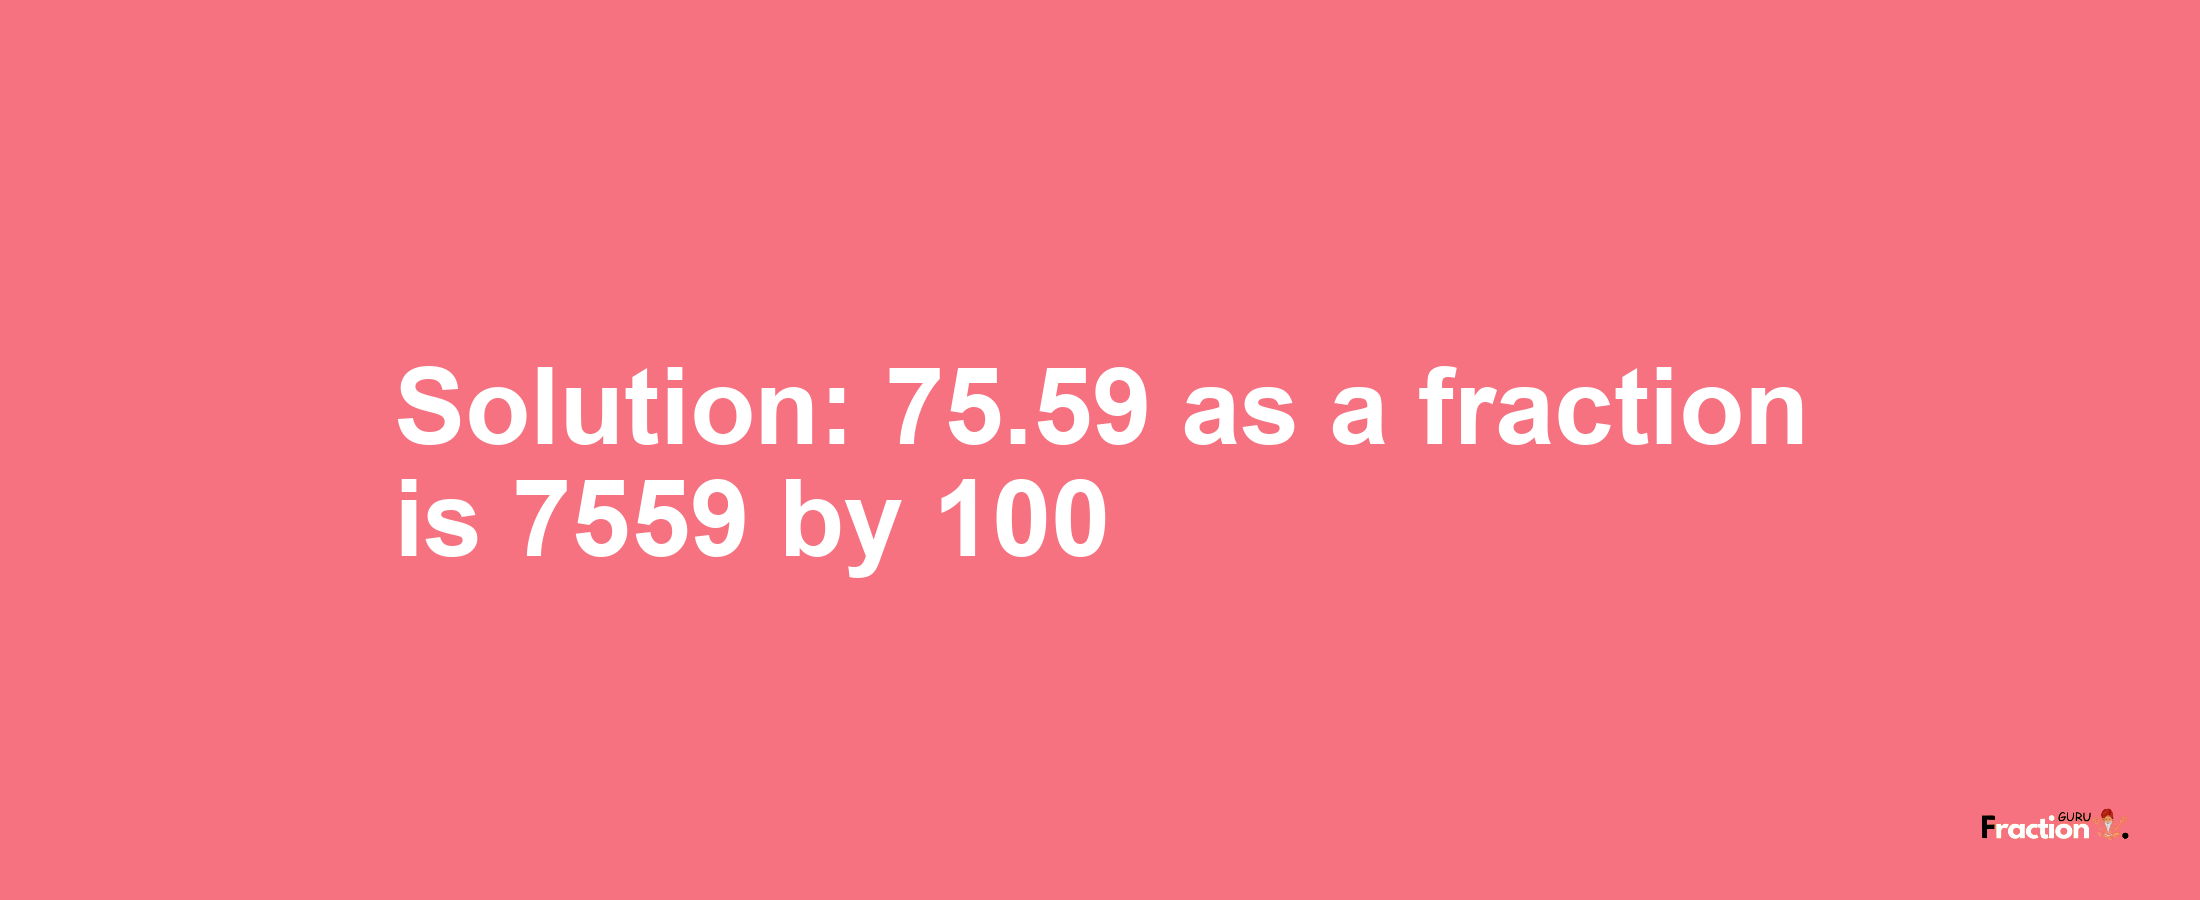 Solution:75.59 as a fraction is 7559/100